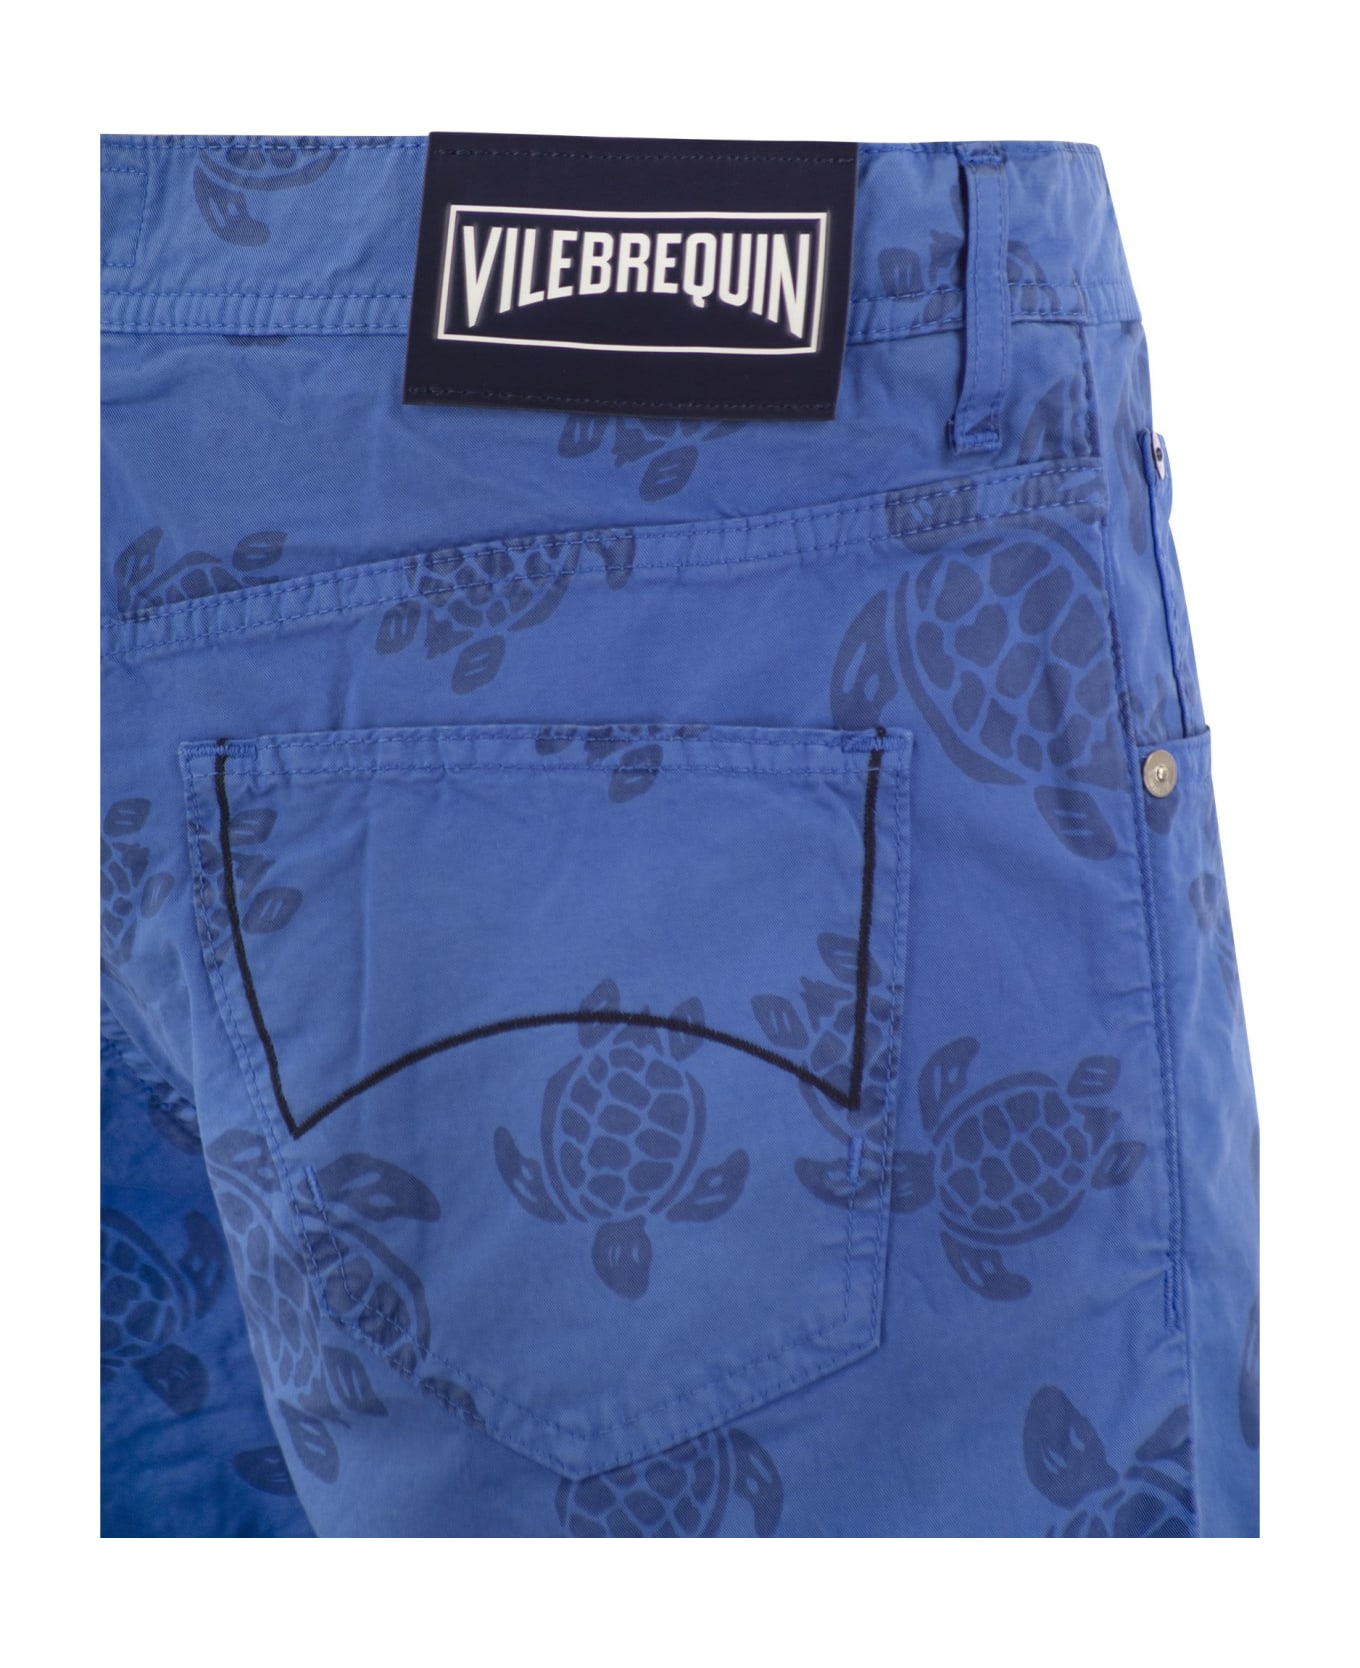 Vilebrequin Bermuda Shorts With Ronde Des Tortues Resin Print - Blue Marine